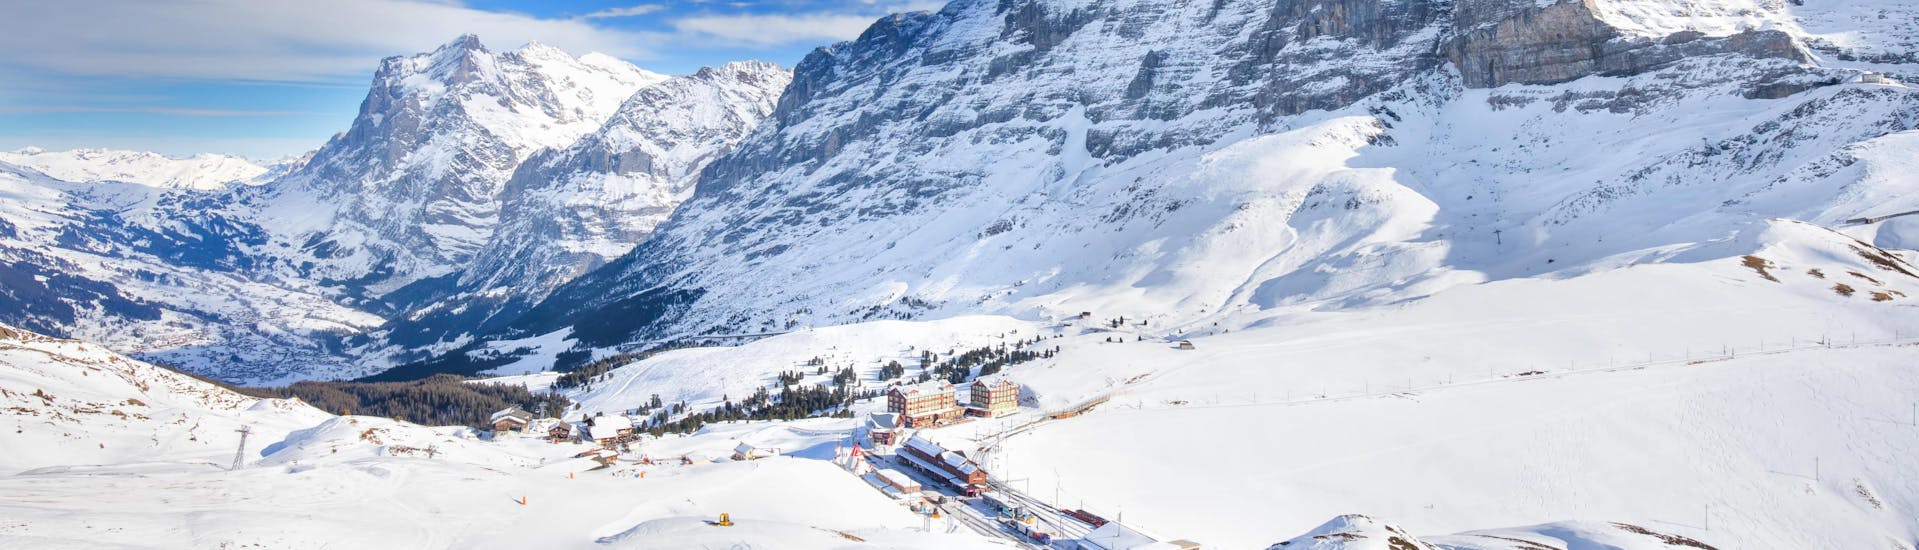 View of the snowy slopes of Wengen in the Jungfrau region, where many ski schools offer their ski lessons.